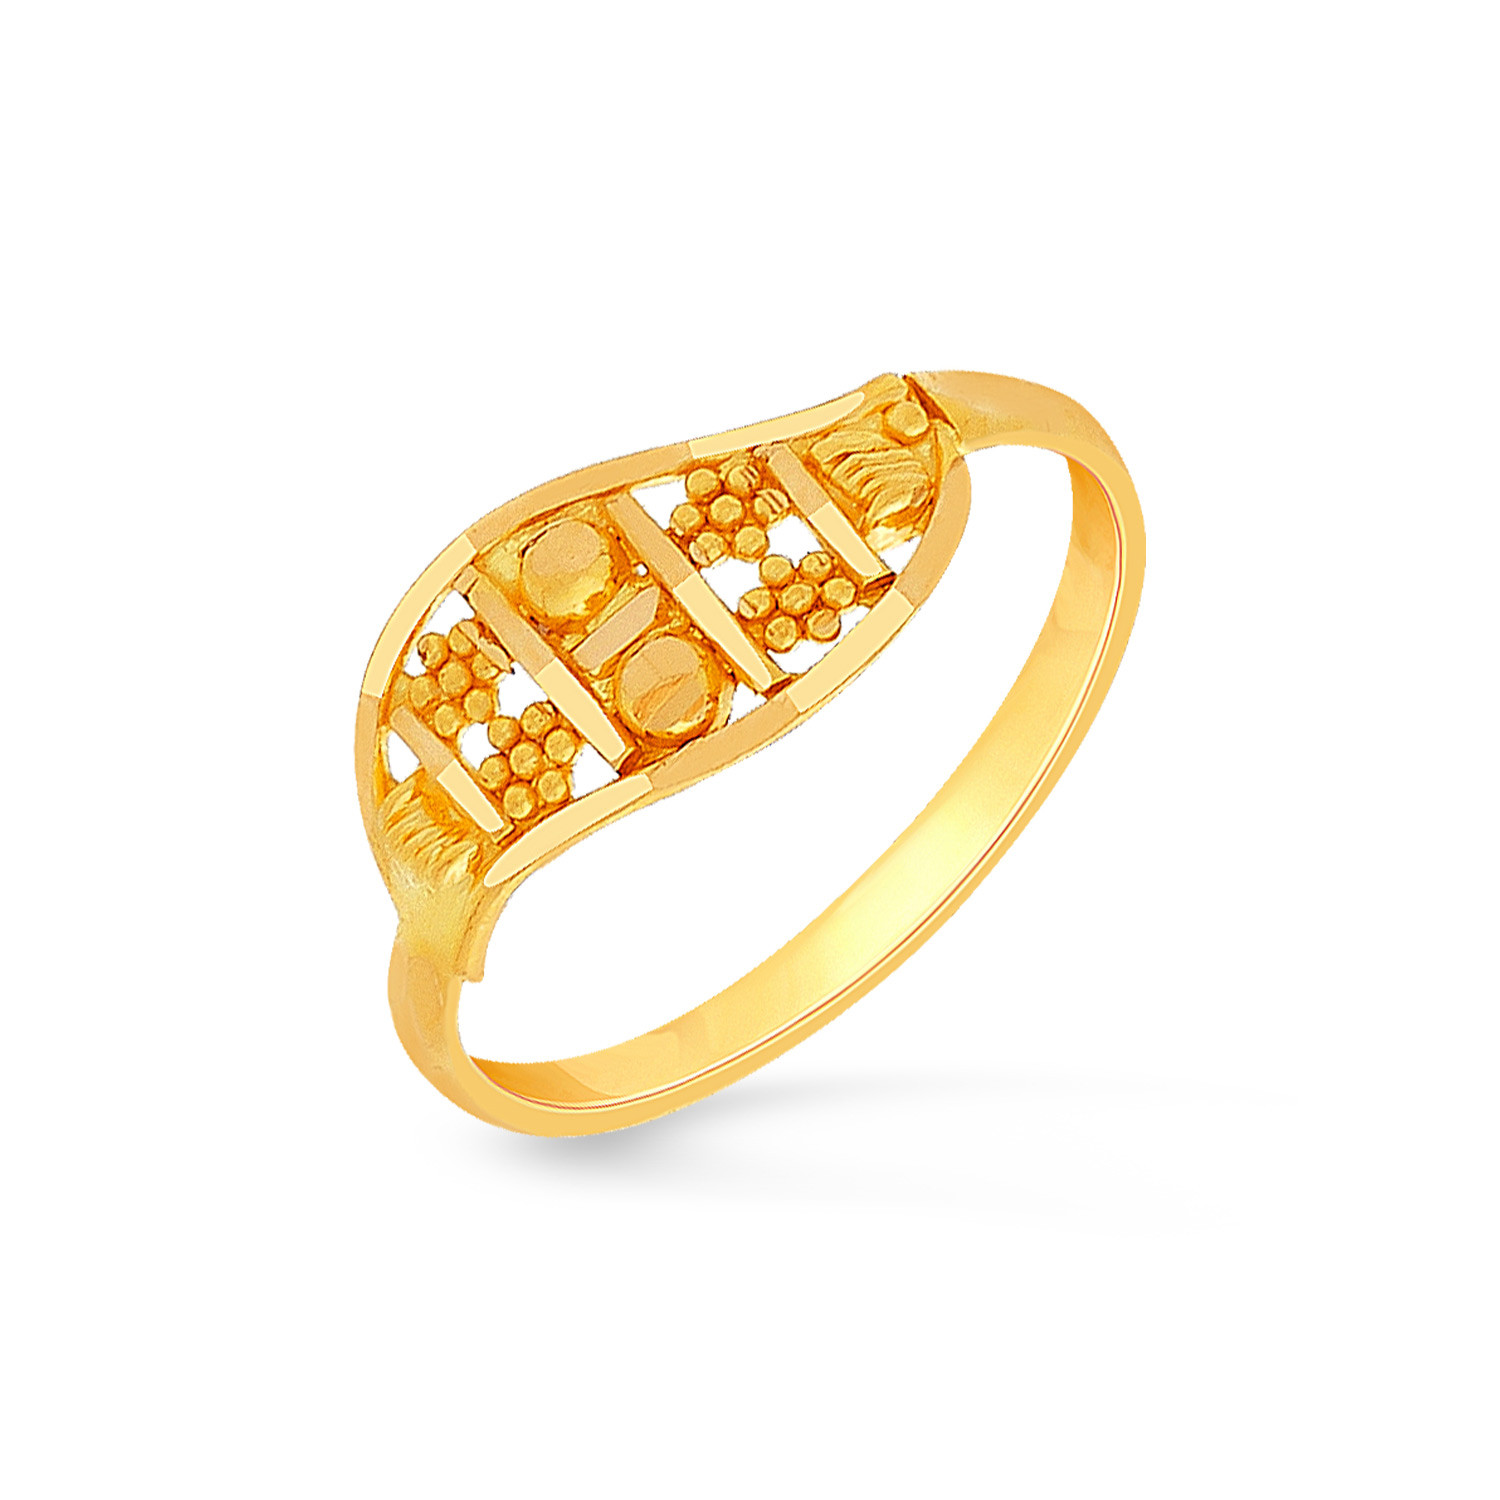 Buy MALABAR GOLD AND DIAMONDS Womens Gold Ring SKYFRDZ056 Size 12.5 |  Shoppers Stop